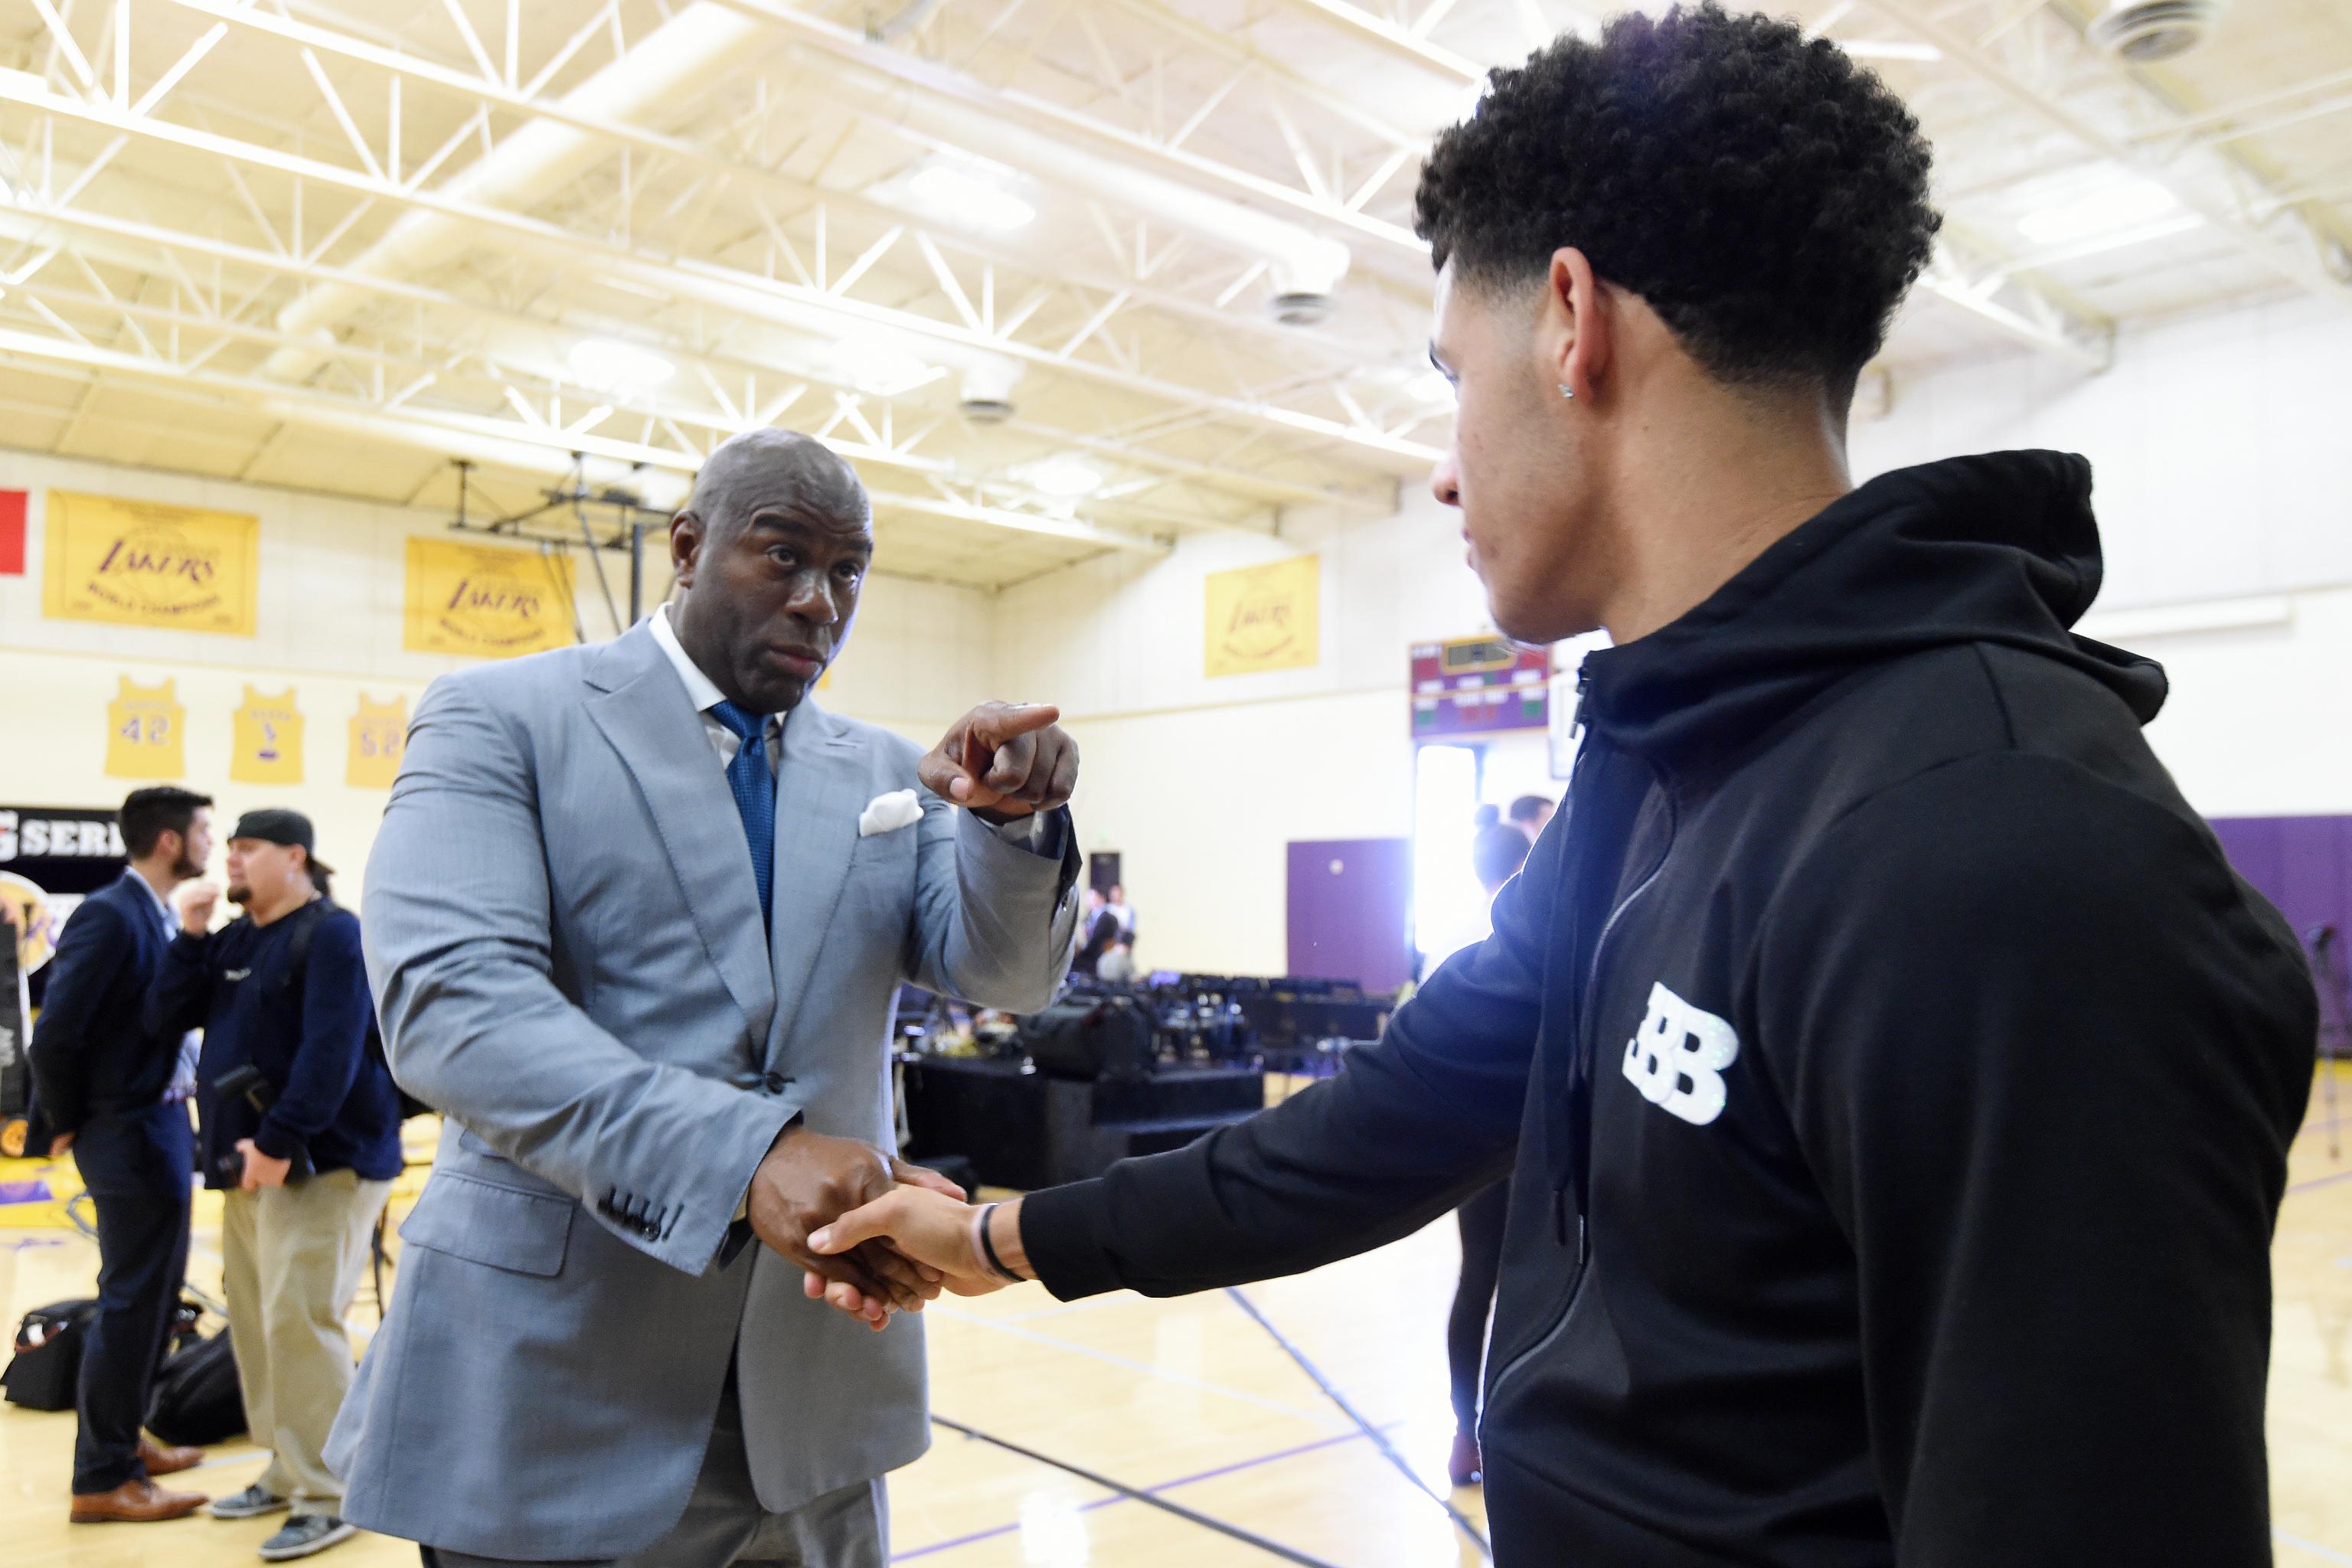 Magic Johnson Defends 2017 Decision to Draft Lonzo Ball to Lakers